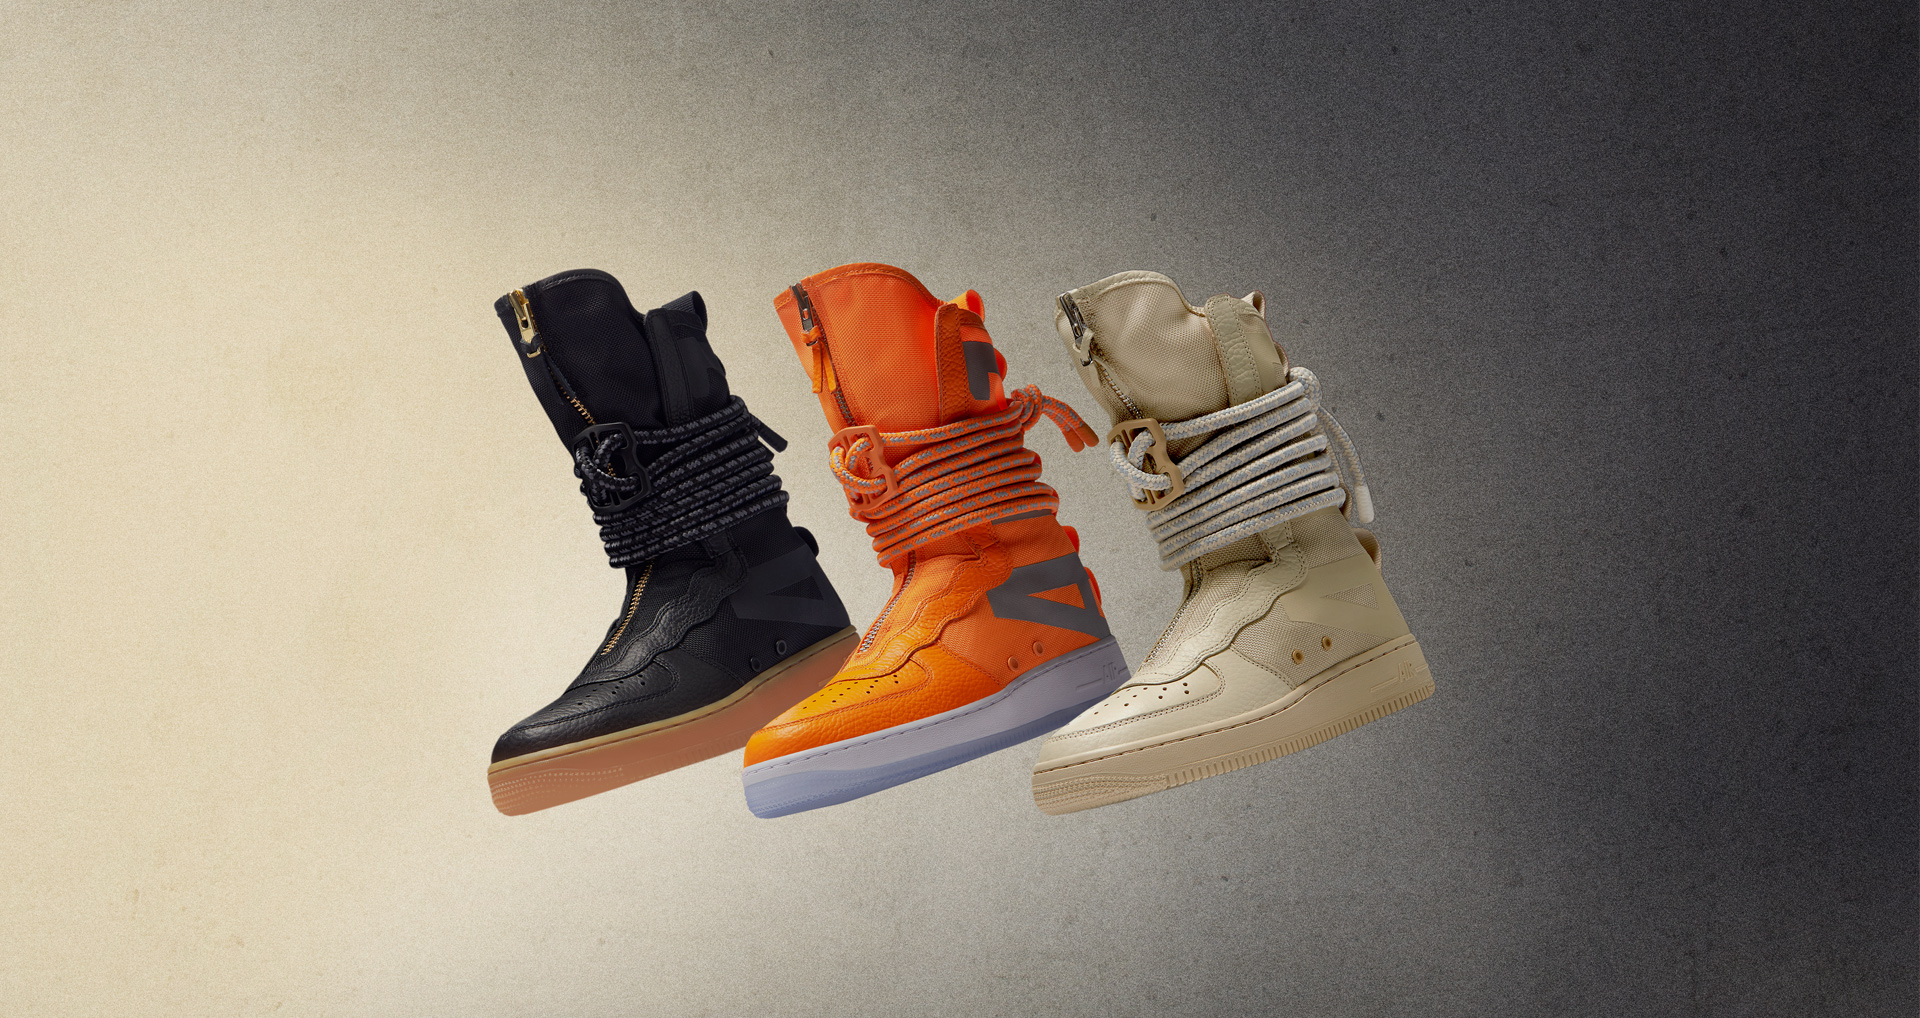 New Zippered SF AF1 High Builds 35 of the Air Force - WearTesters